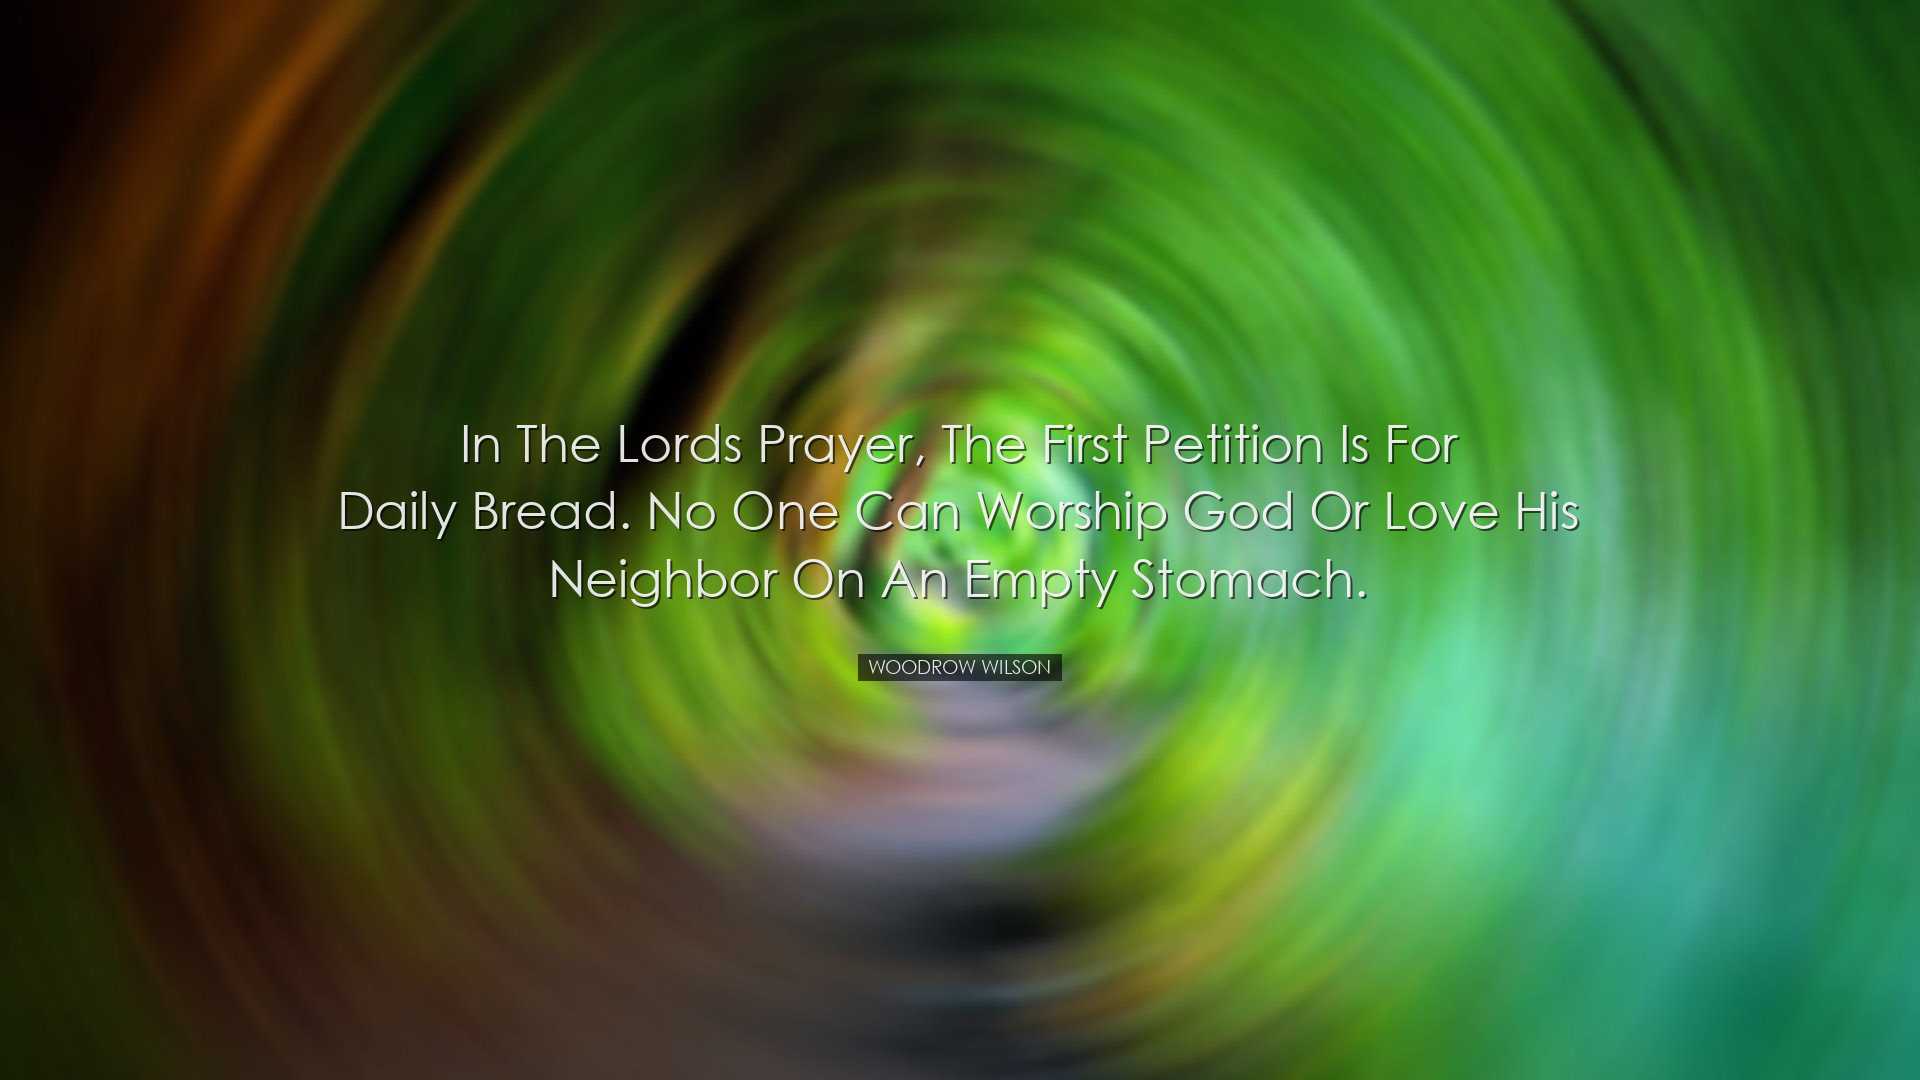 In the Lords Prayer, the first petition is for daily bread. No one